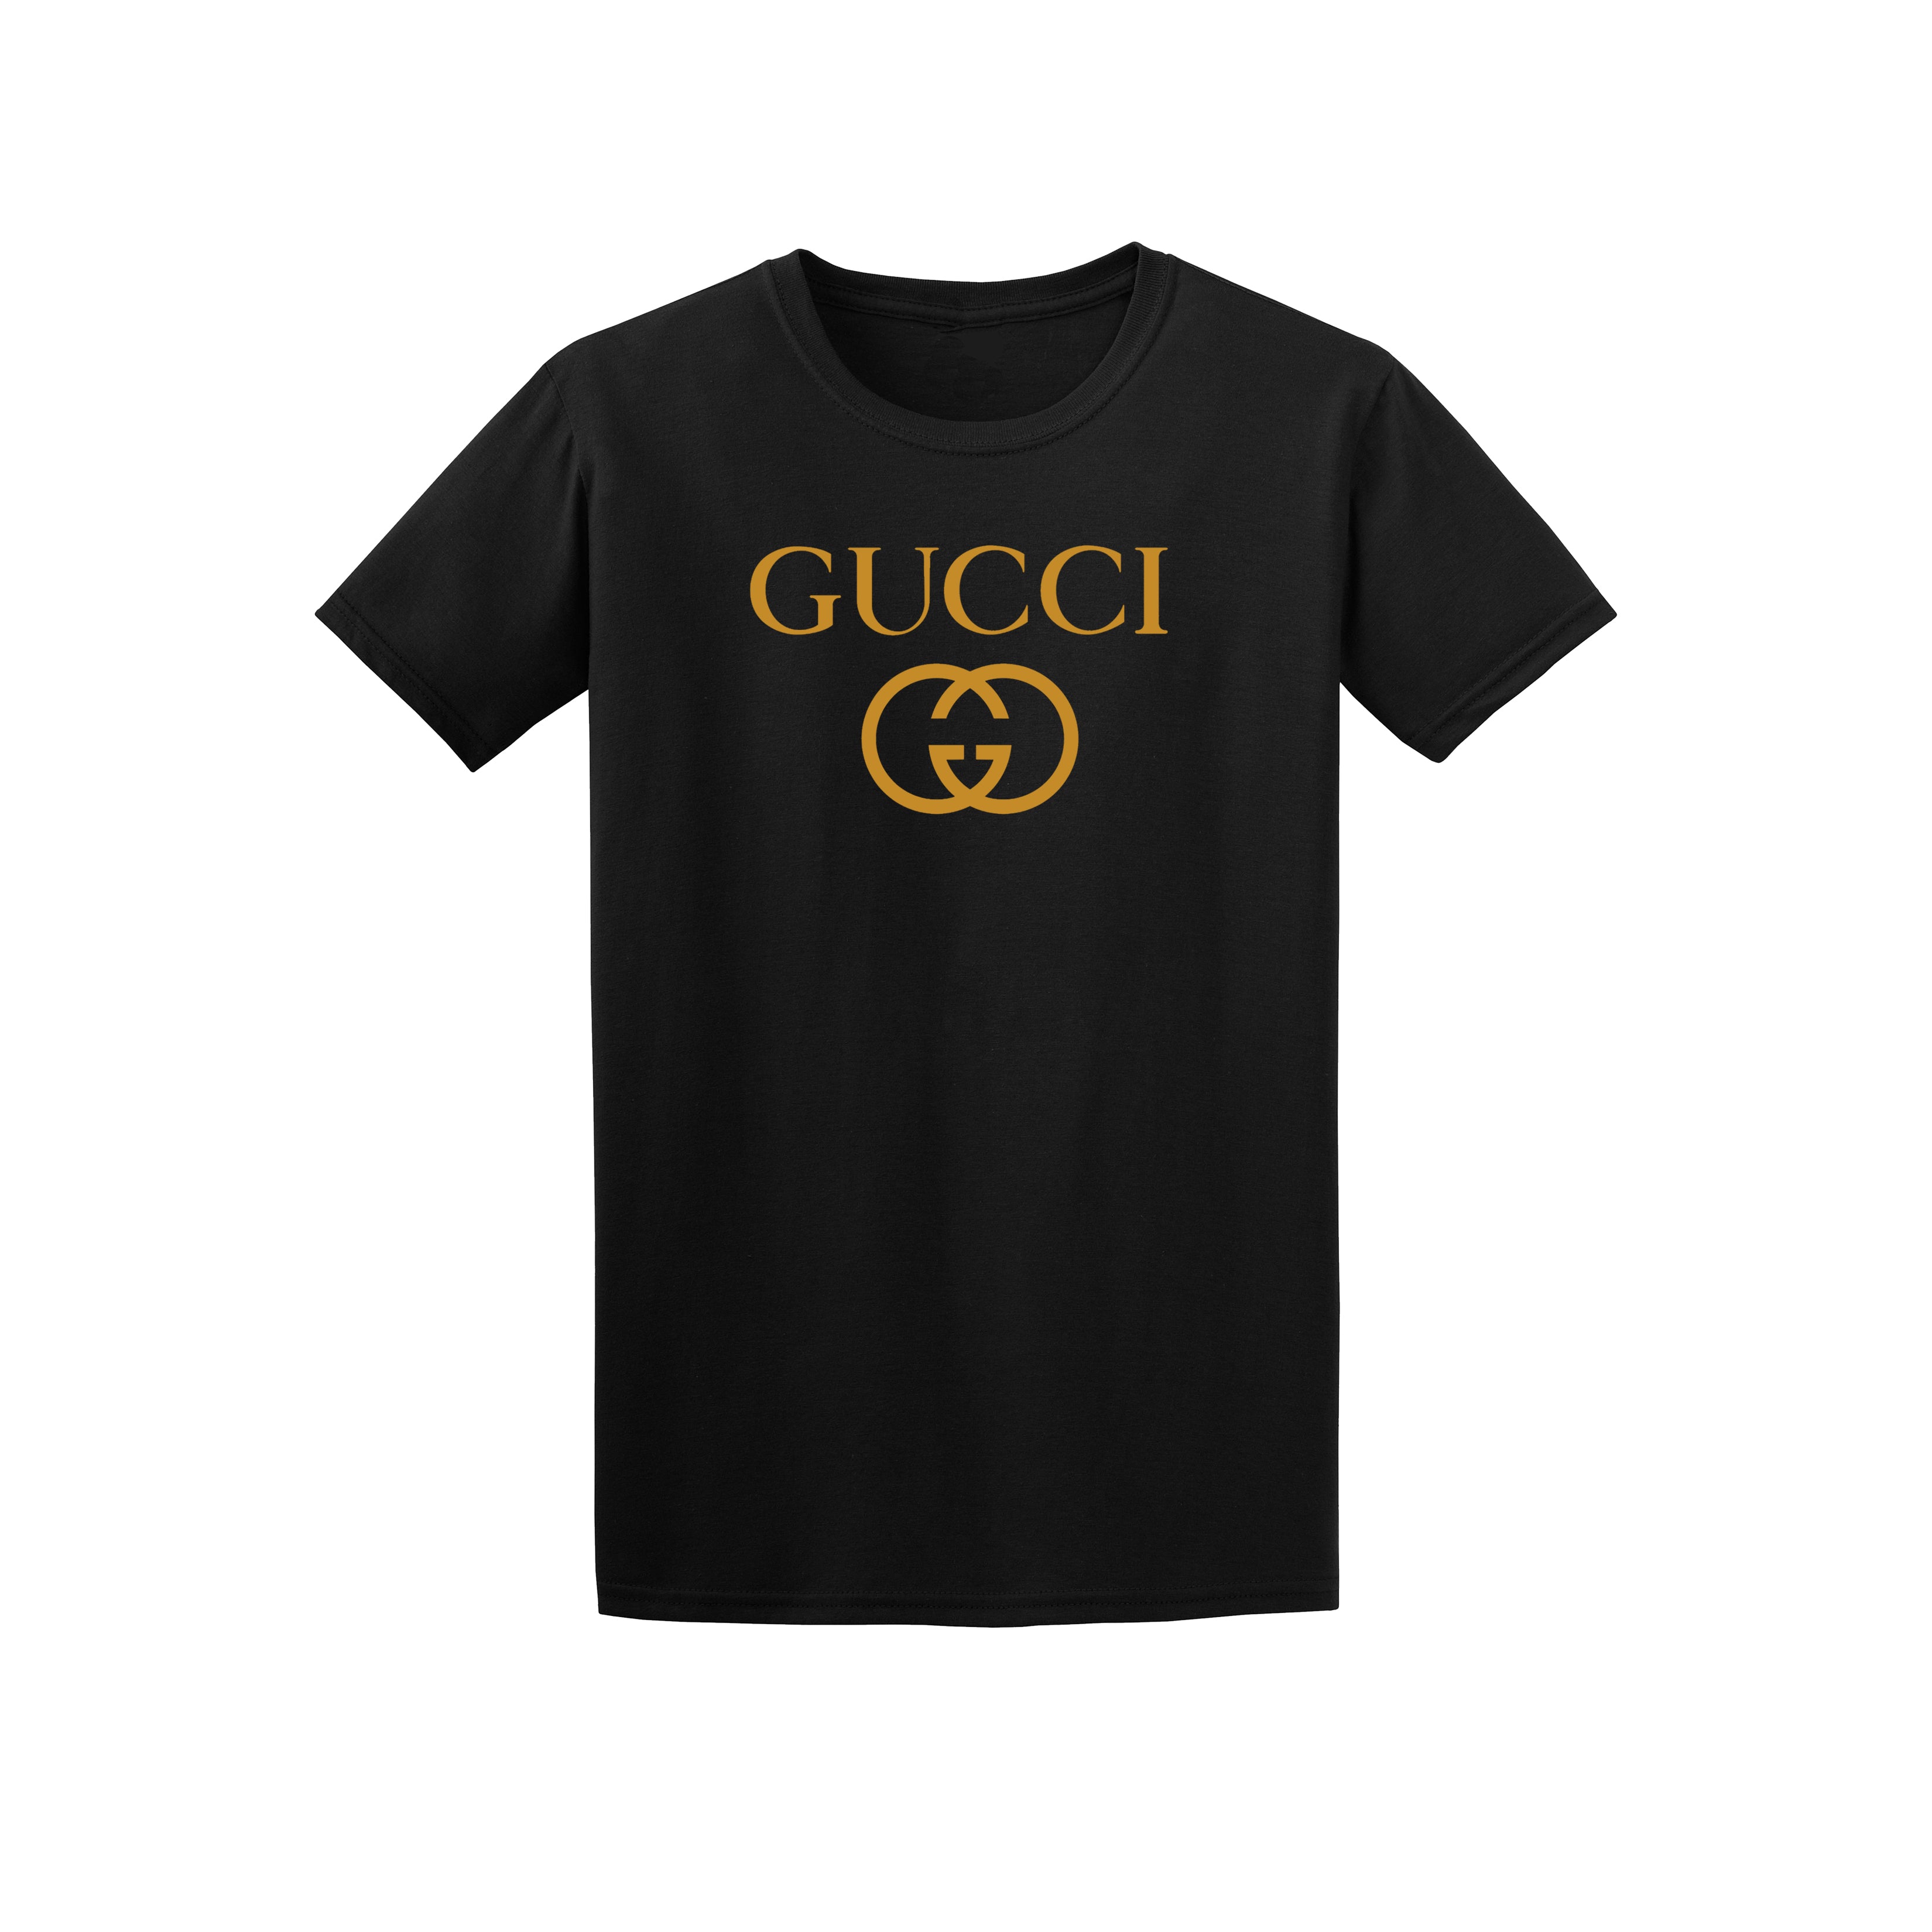 Gucci Inspired Colors) – Gold Peach Apparel